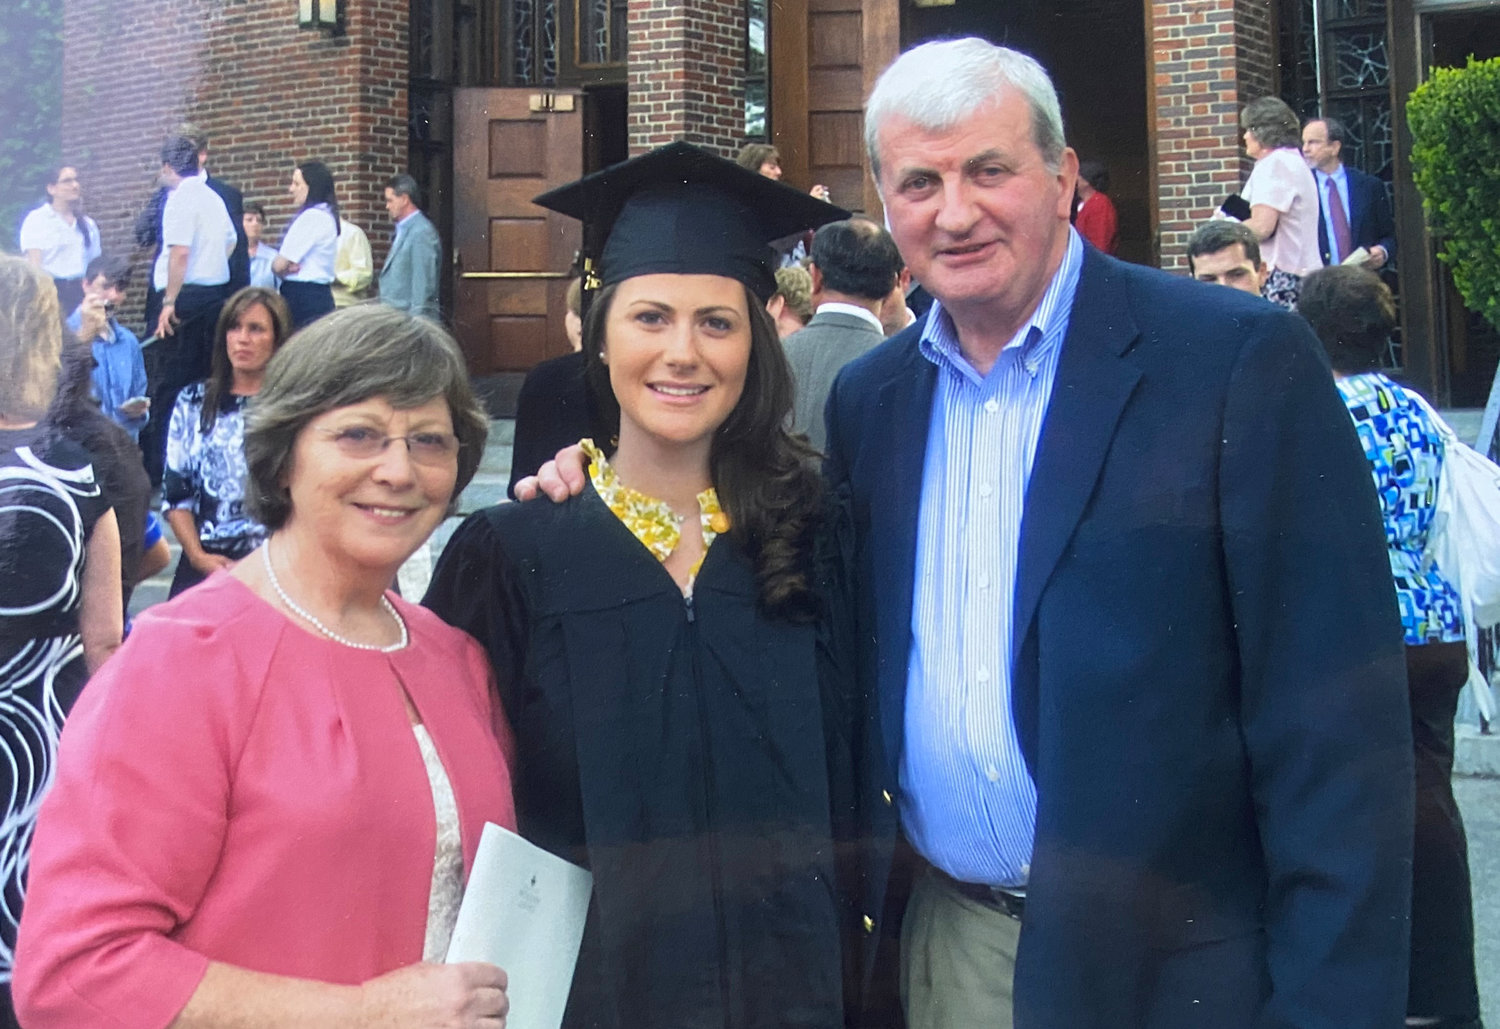 Michael Dunphy, far right, along with his wife, Geraldine, and daughter, Una, at Una’s graduation from St. Anselm College in New Hampshire. Dunphy called sending his children to college, “Simply the American dream.”